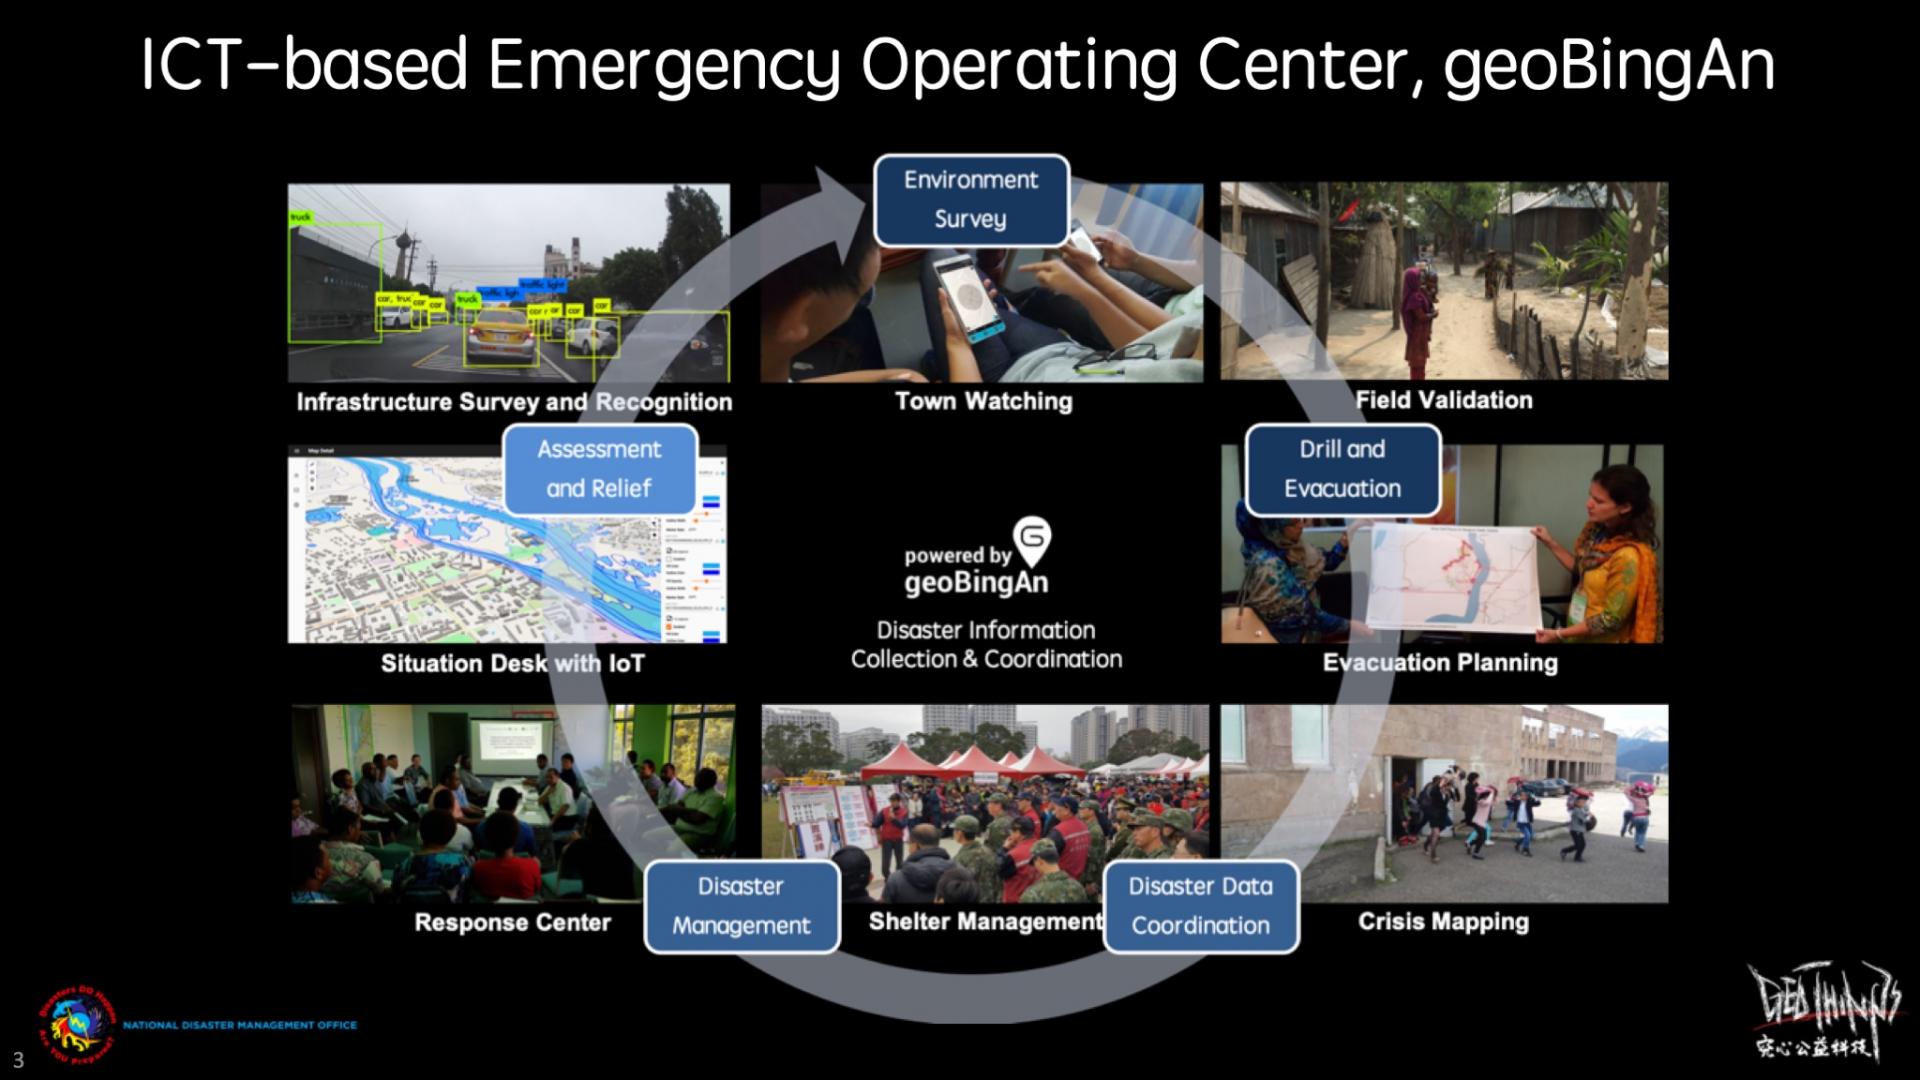 The humanitarian ICT, geoBingAn, is an integrated service that works for pre-/in-/post-disaster response